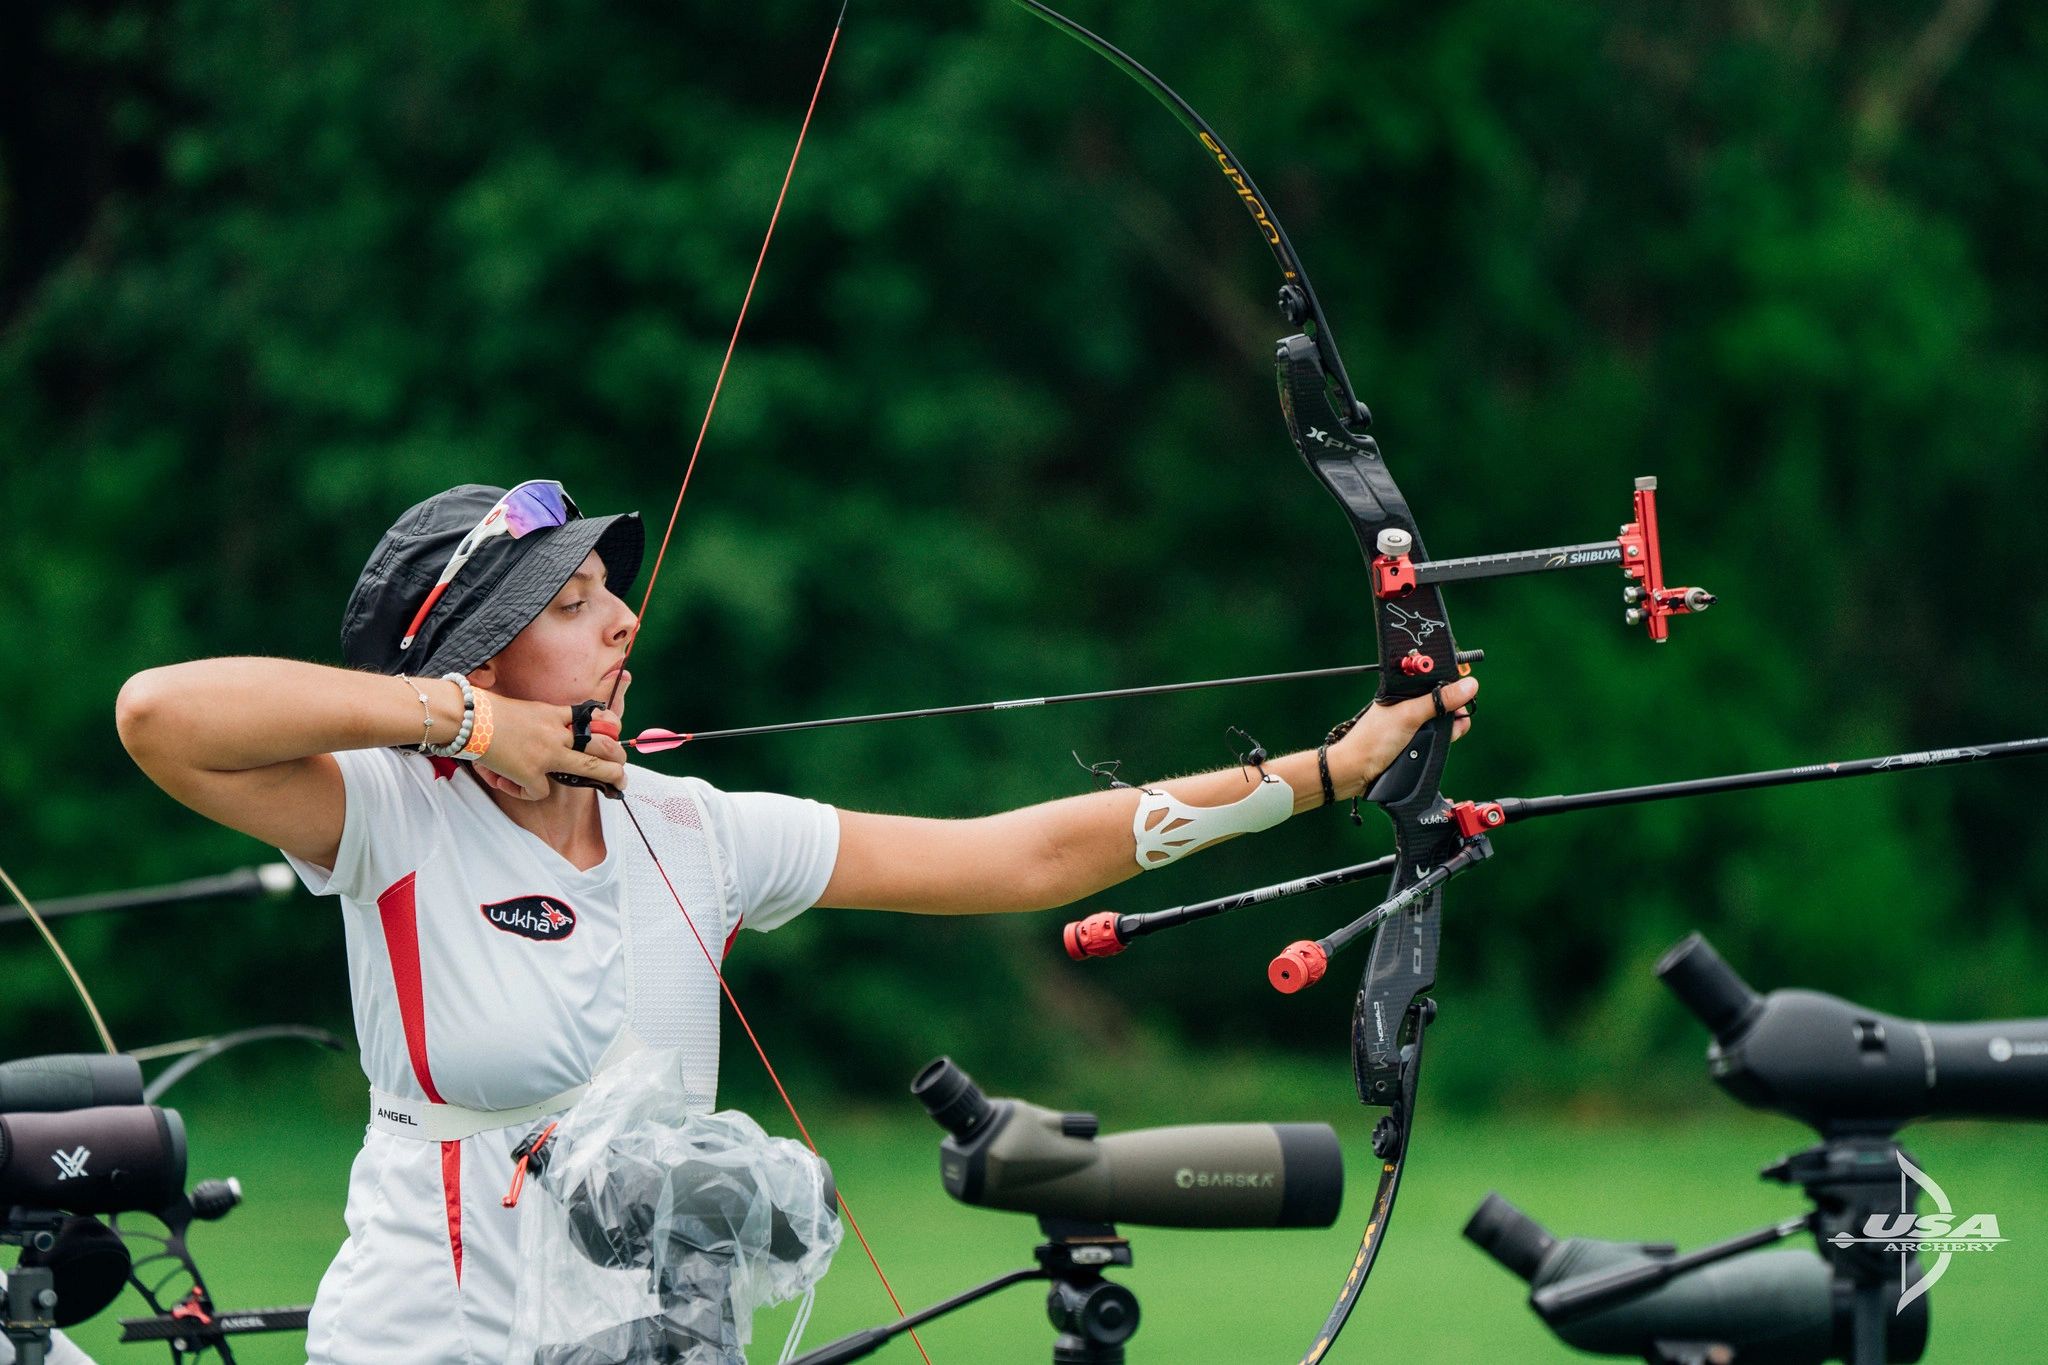 136th USA Archery Target Nationals and US Open